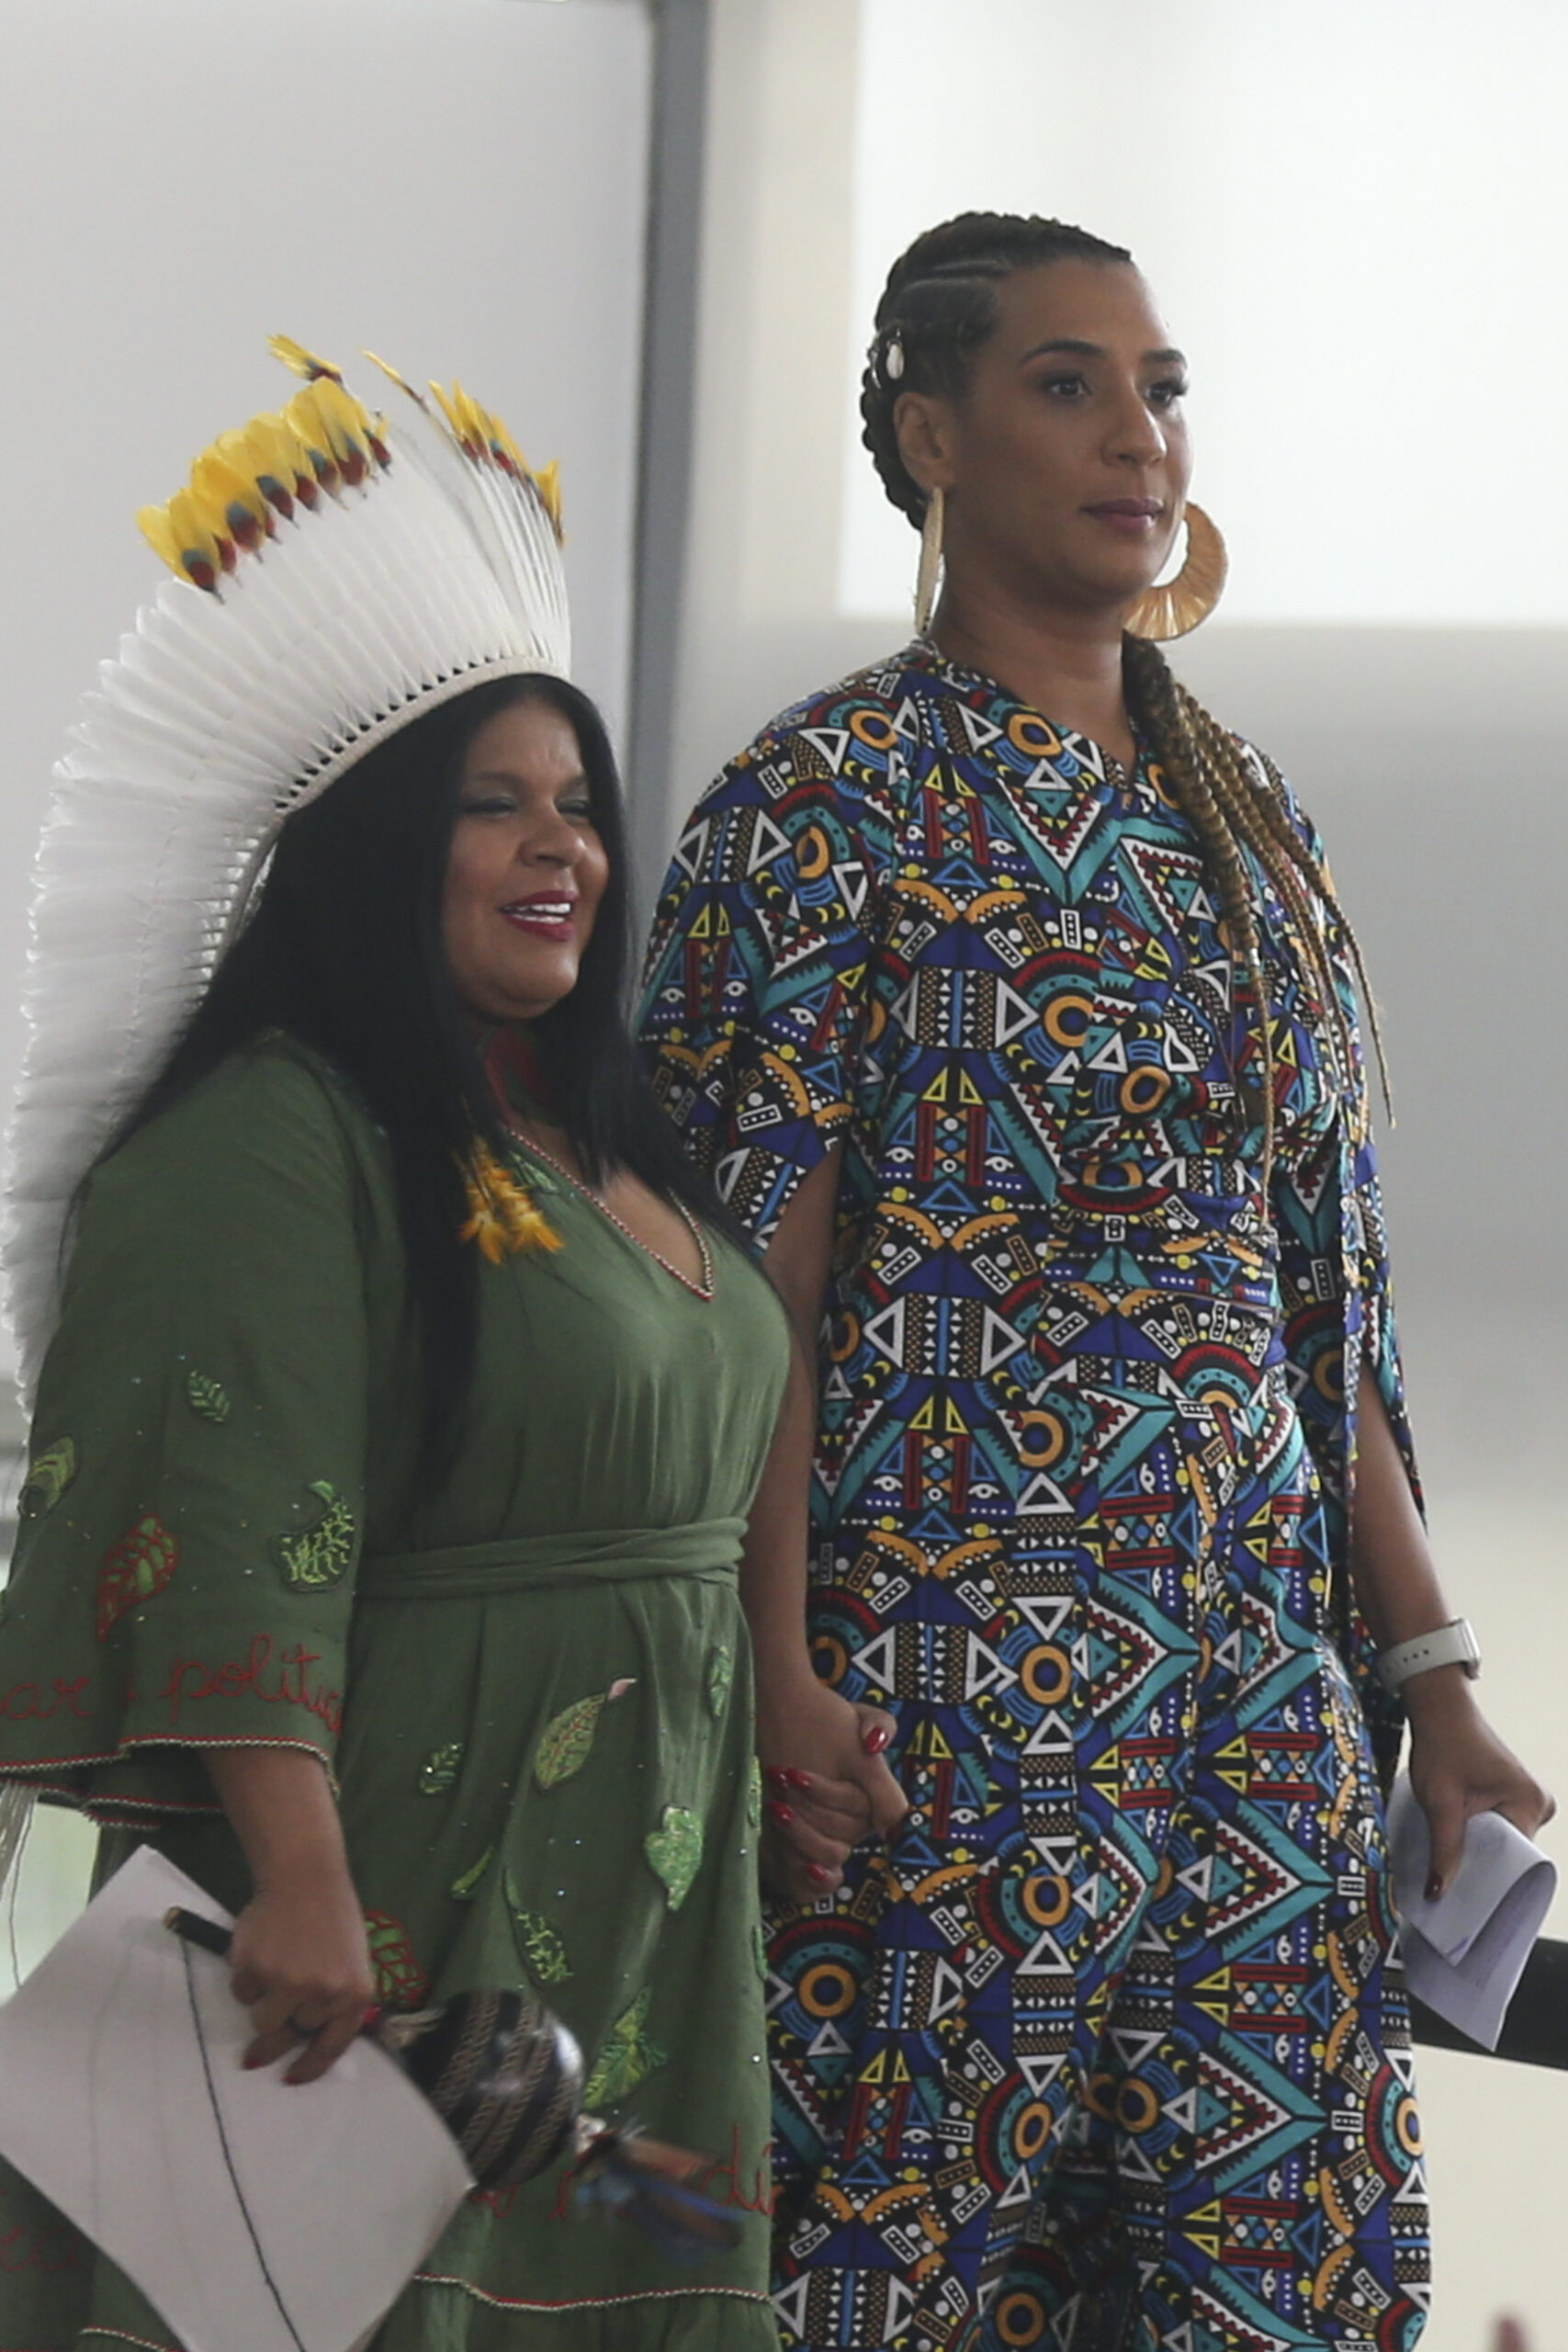 Inauguration of the ministers for Indigenous Peoples, Sonia Guajajara, and for Racial Equality, Anielle Franco. Photo: Valter Campanema/Agência Brasil